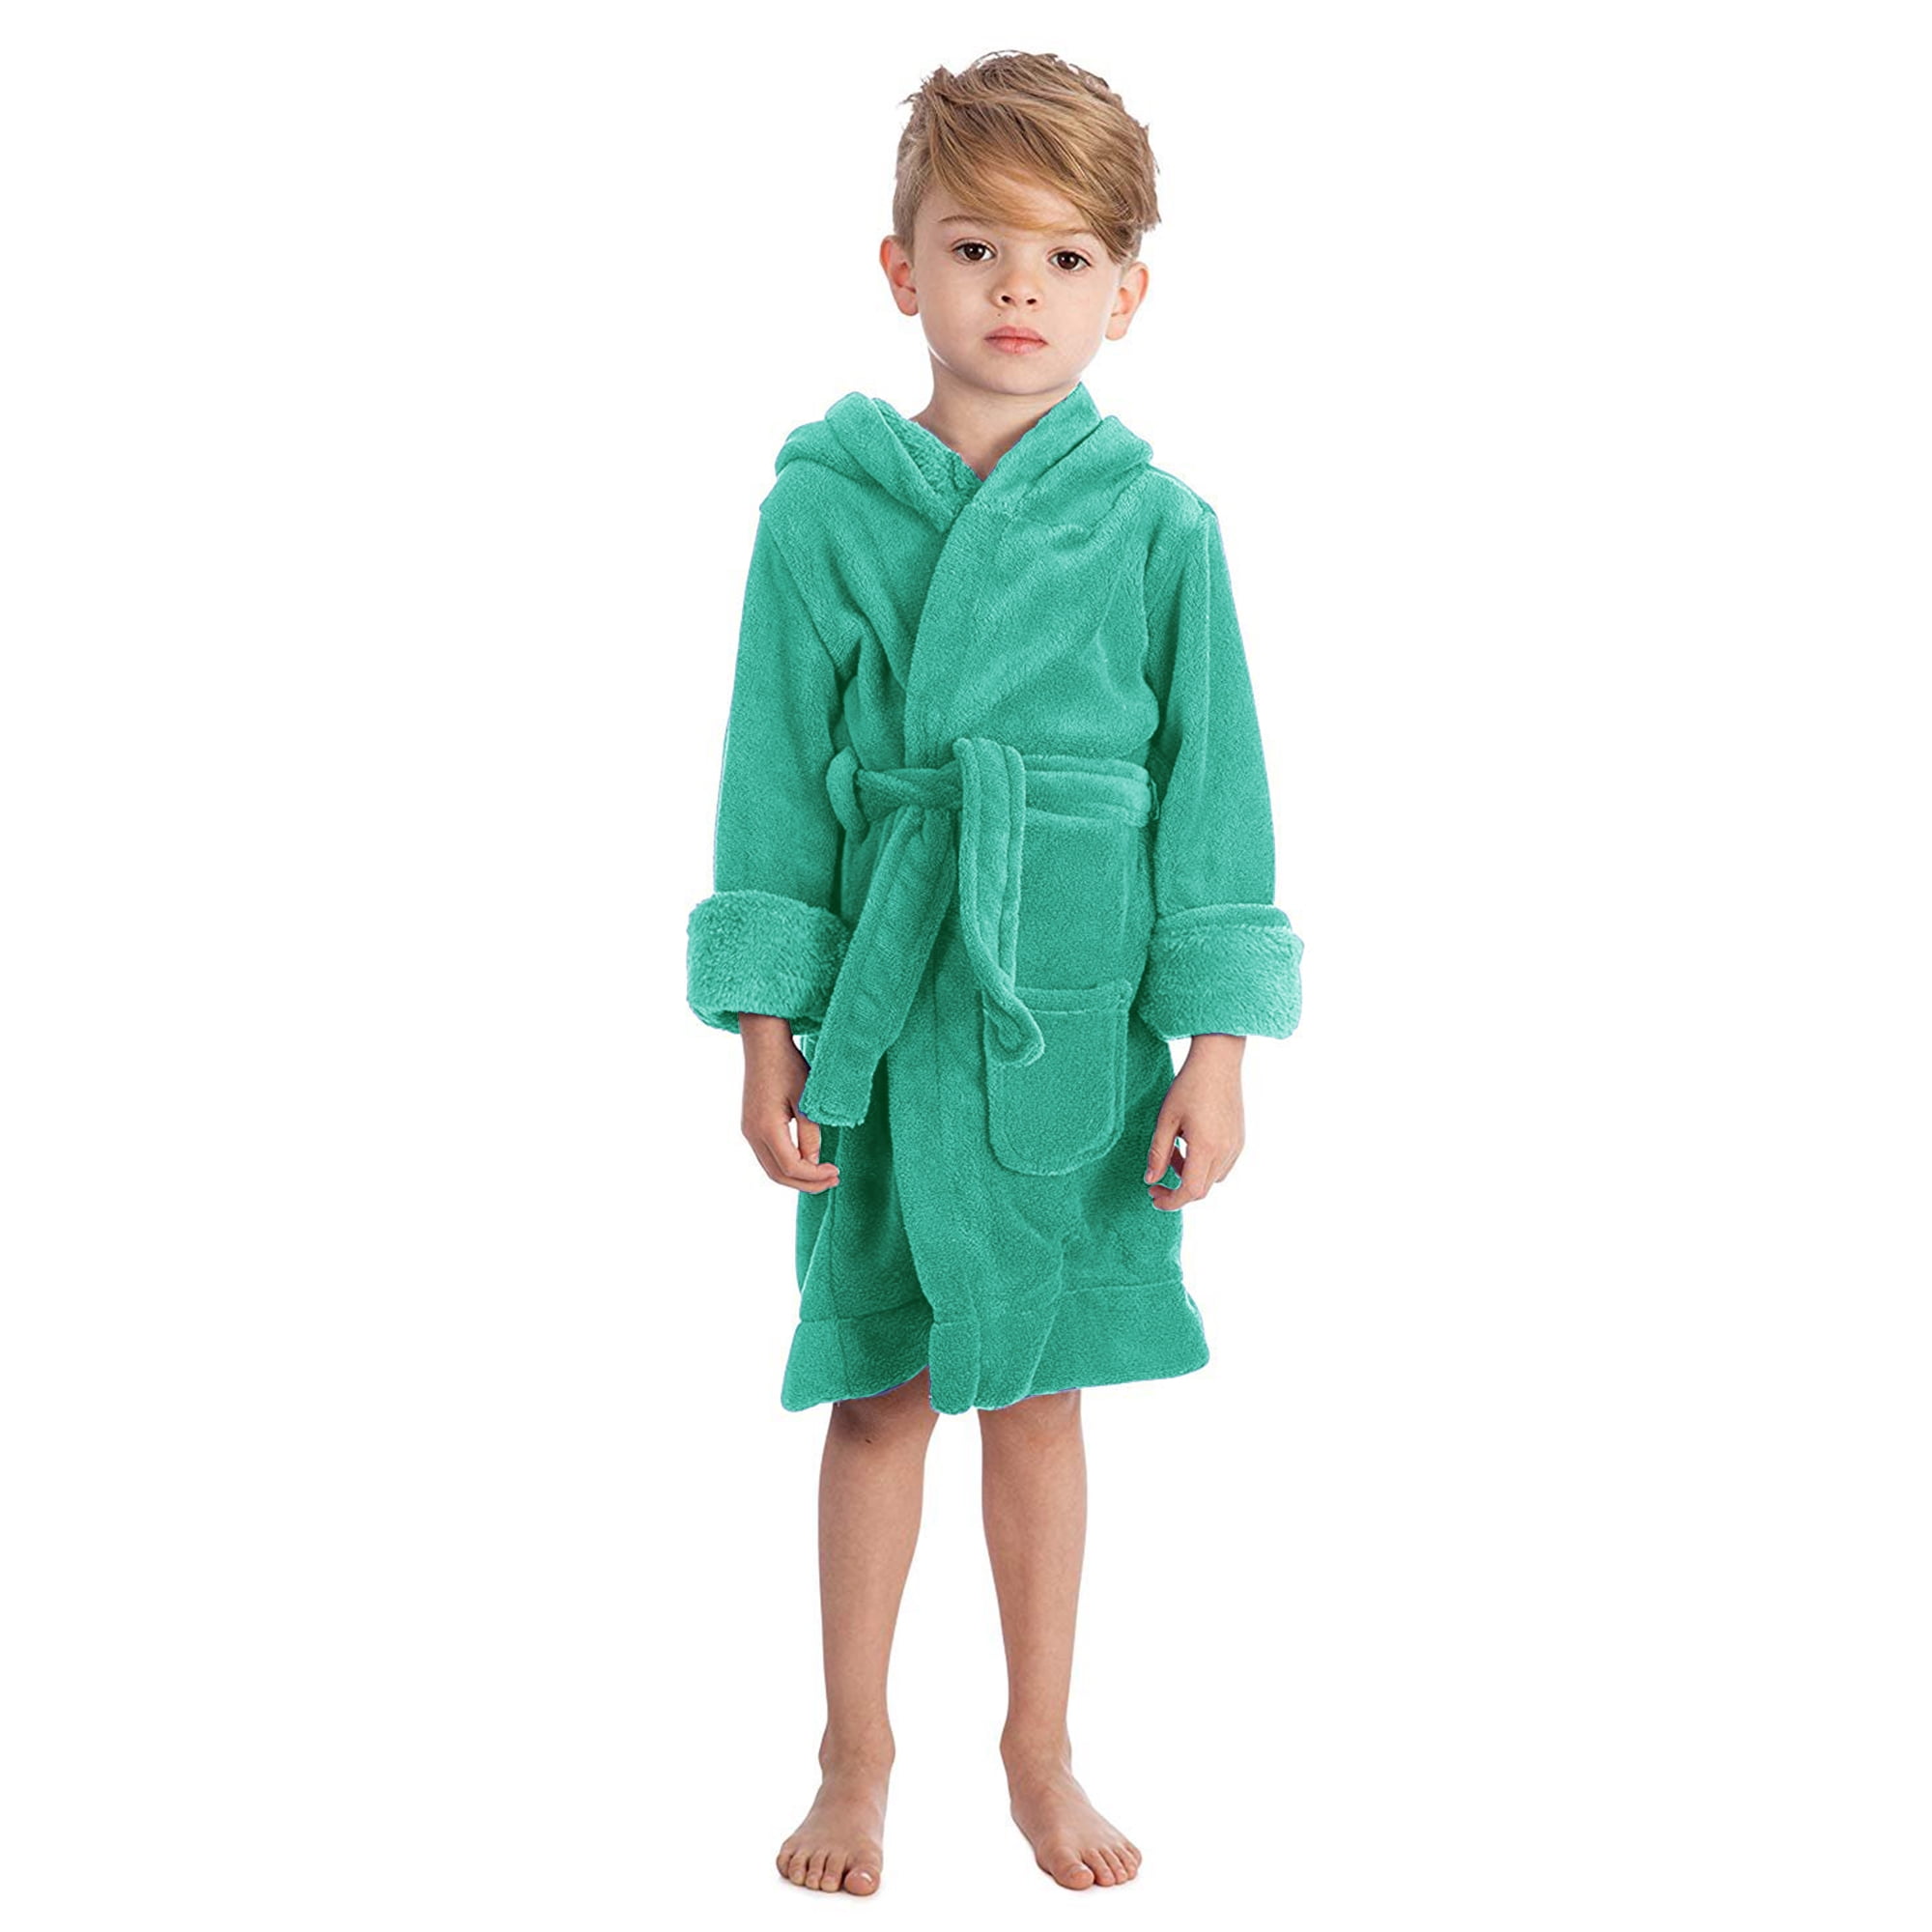 customizable robe with name on textile vinyl and with matching bag Rubber school gown for nursery school available in various sizes Clothing Unisex Kids Clothing Pyjamas & Robes Robes 